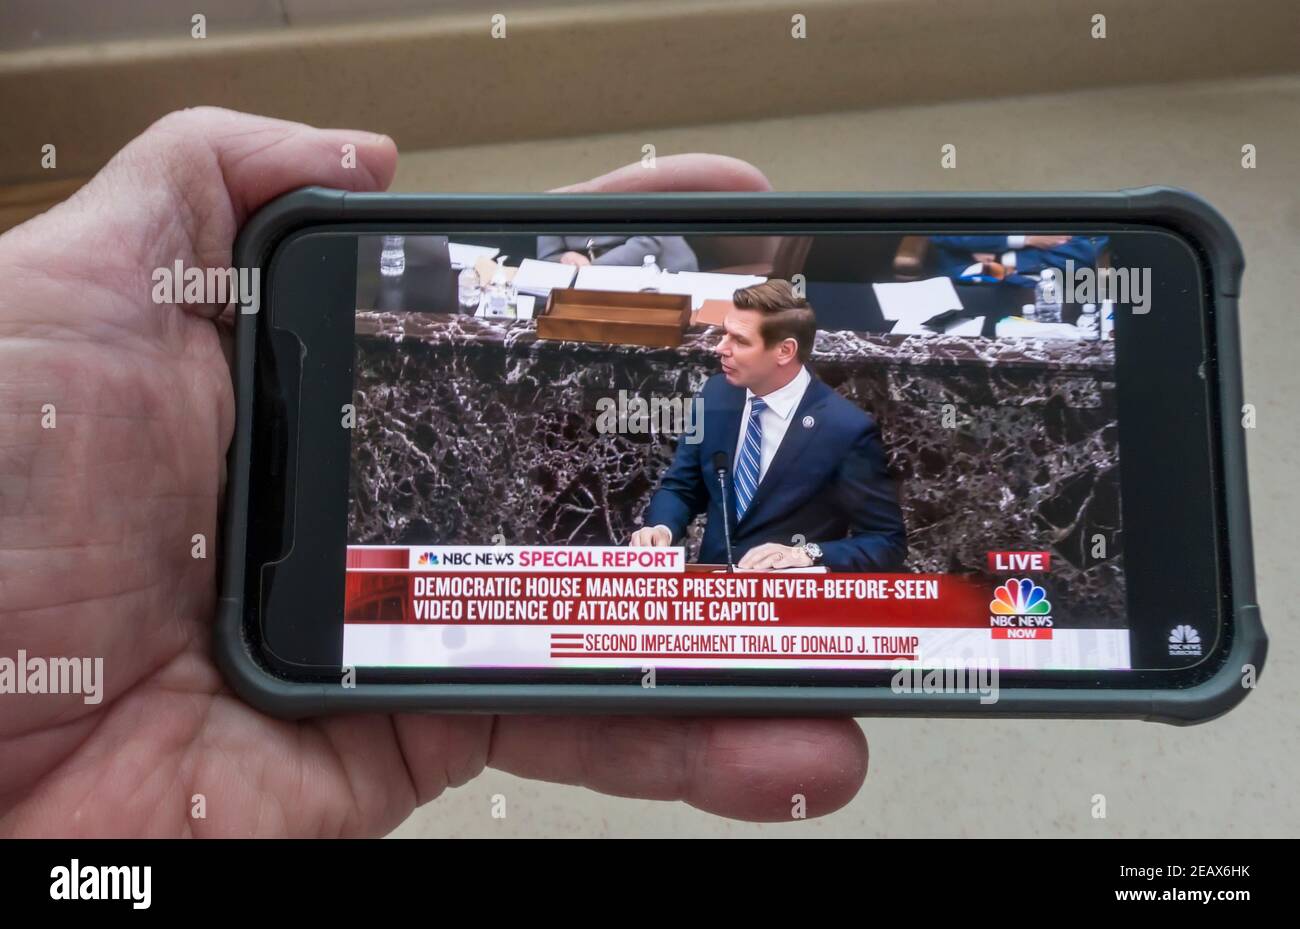 Second Trump Impeachment Trial evidence viewed on smartphone Stock Photo